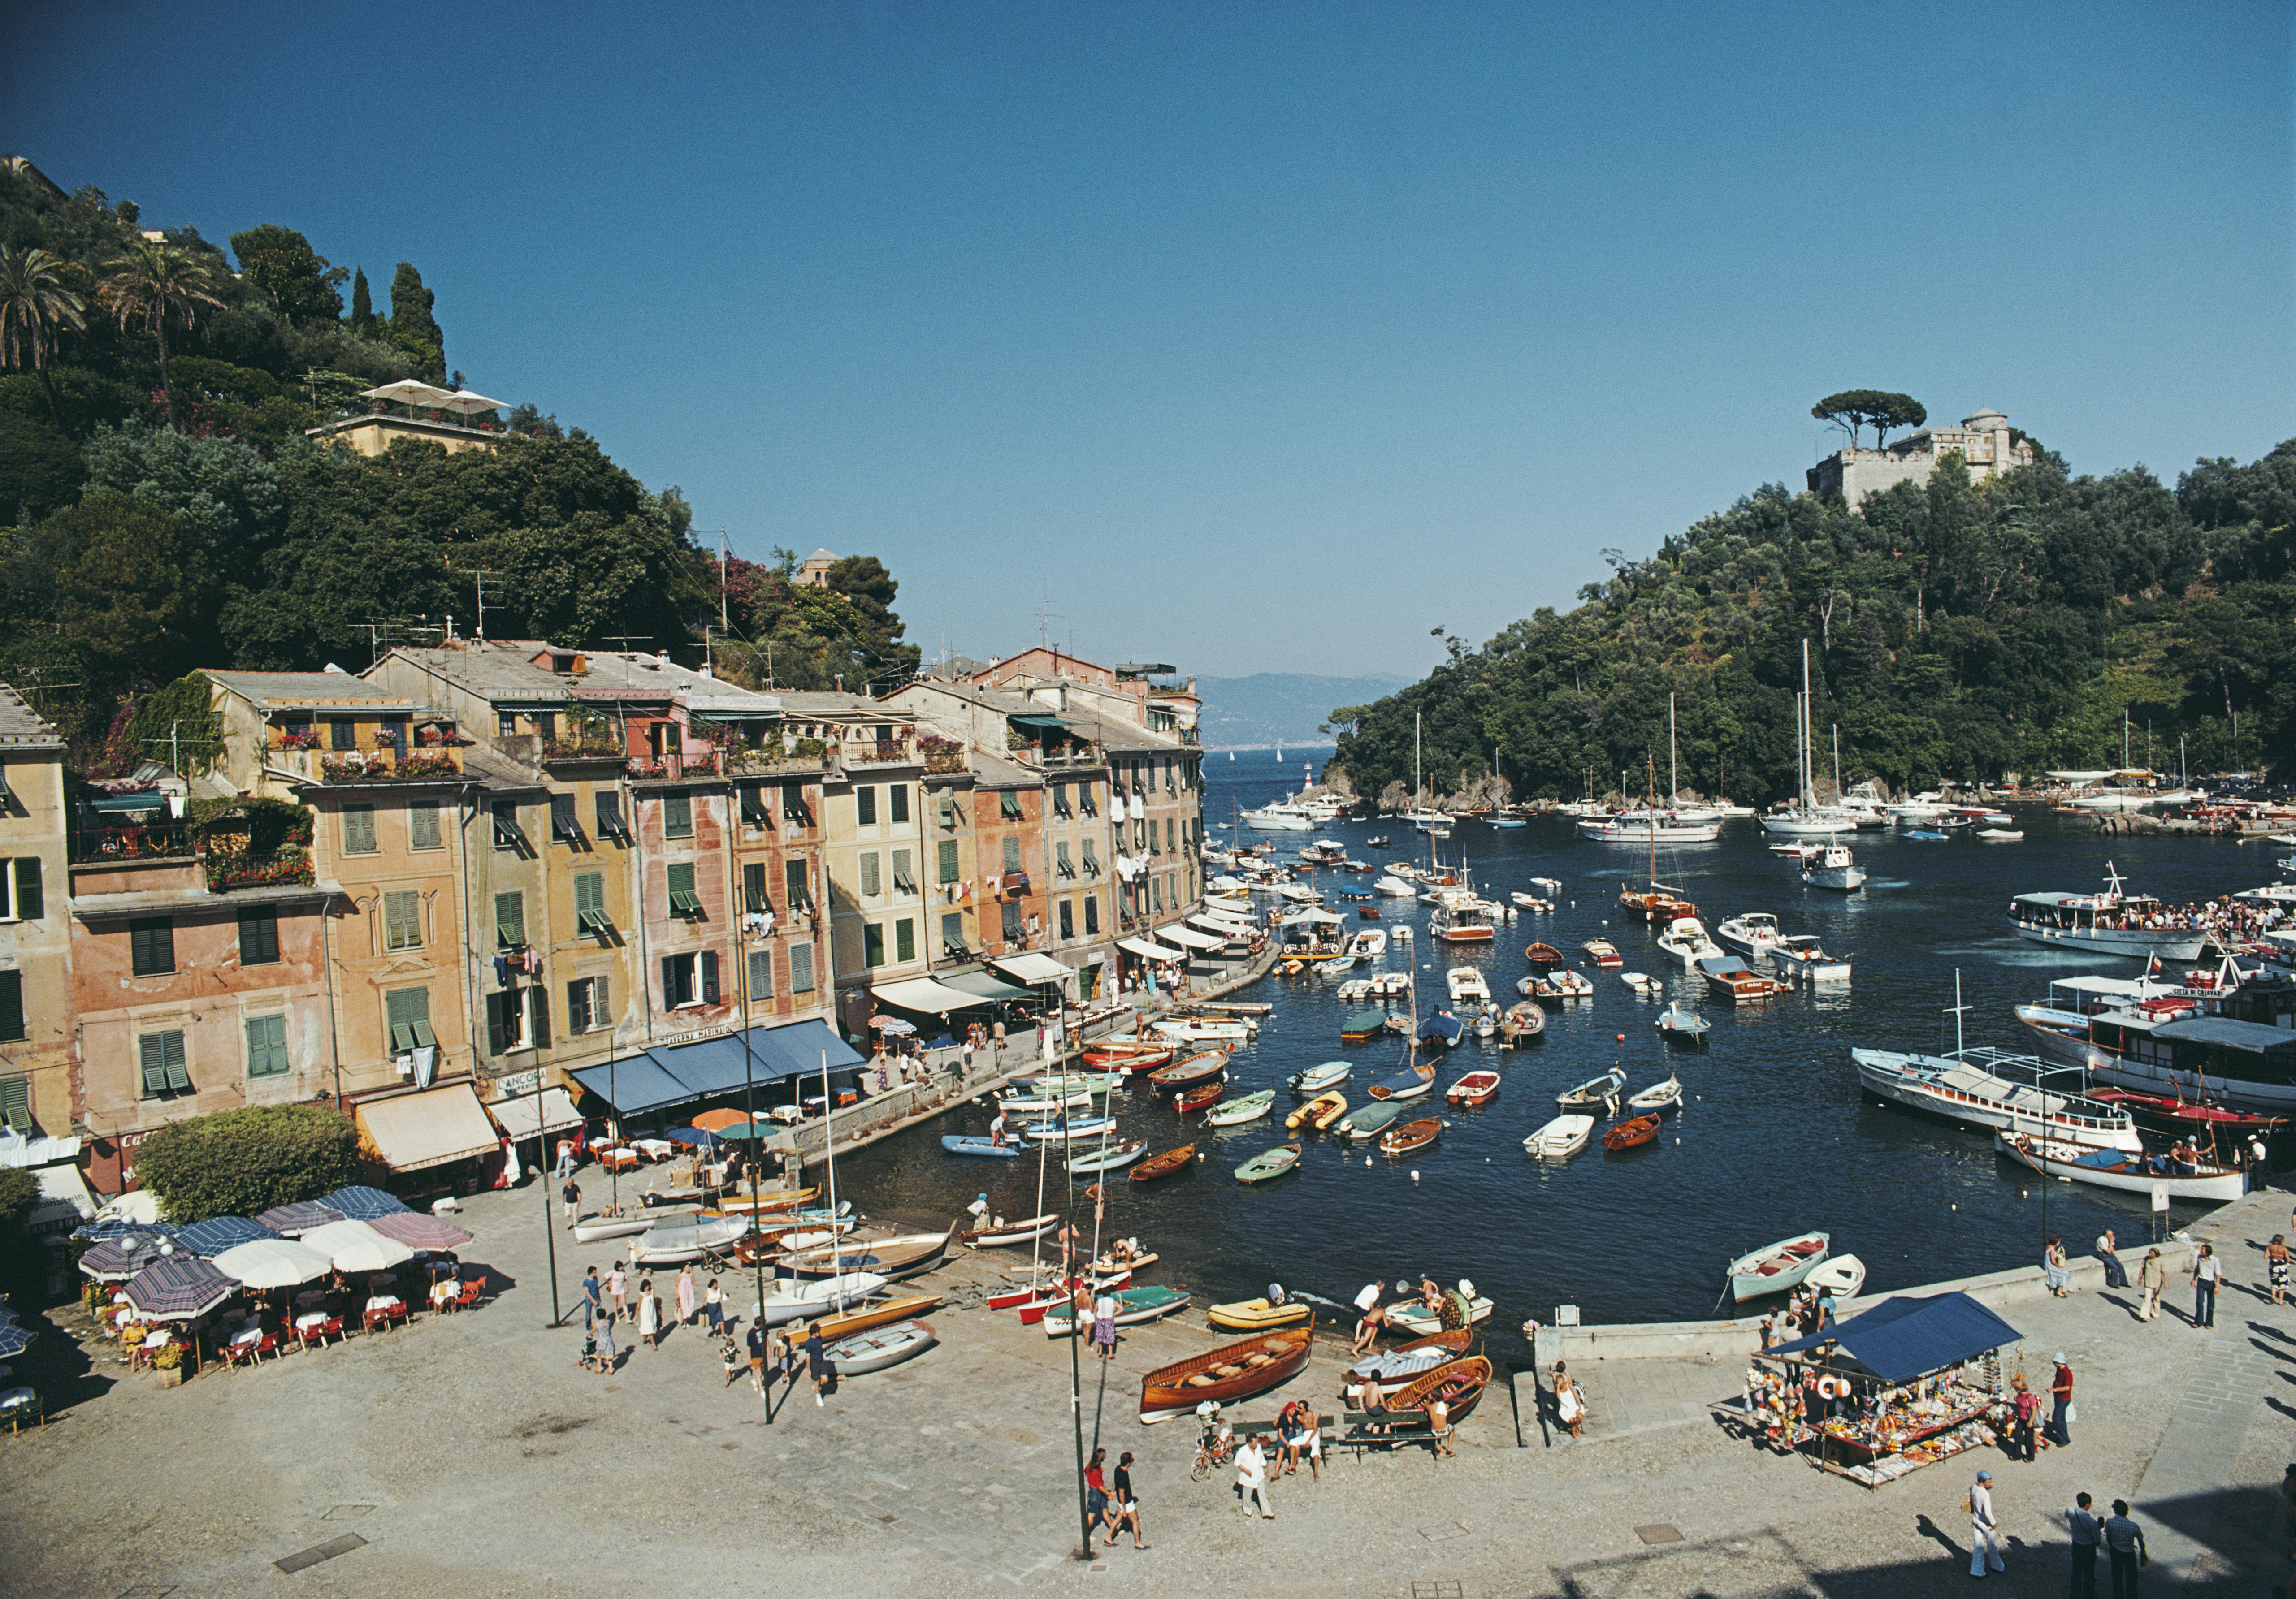 'Portofino Harbour' 1977 Slim Aarons Limited Estate Edition Print 

The harbour in the Ligurian town of Portofino, August 1977.

Produced from the original transparency
Certificate of authenticity supplied 
Archive stamped

Paper Size  24x20 inches